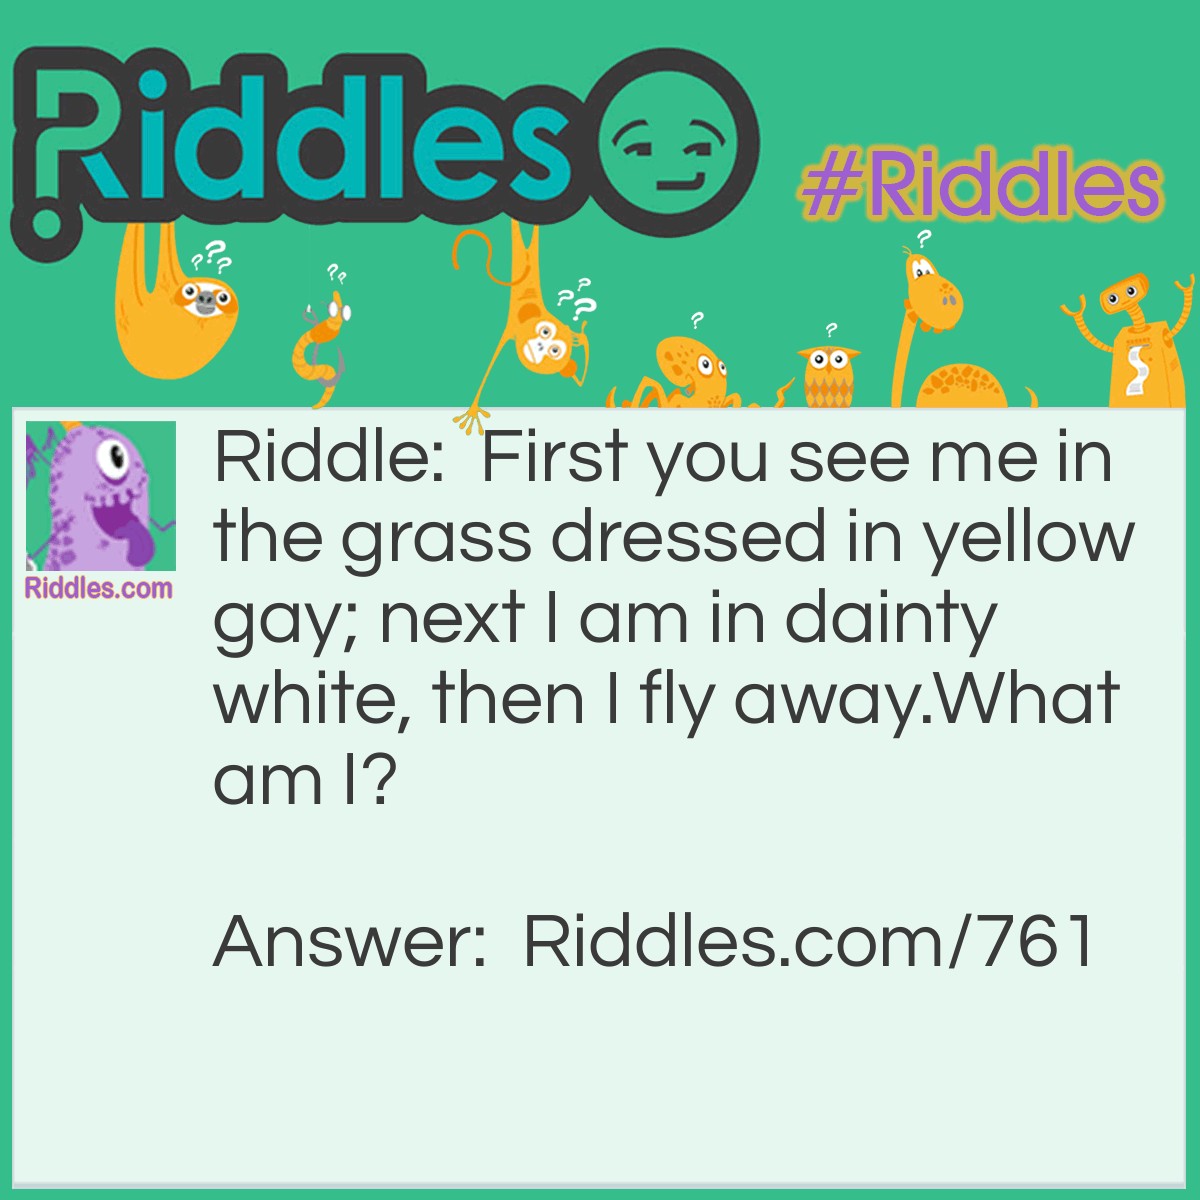 Riddle: First you see me in the grass dressed in yellow gay; next I am in dainty white, then I fly away.
What am I? Answer: I am a Dandelion.